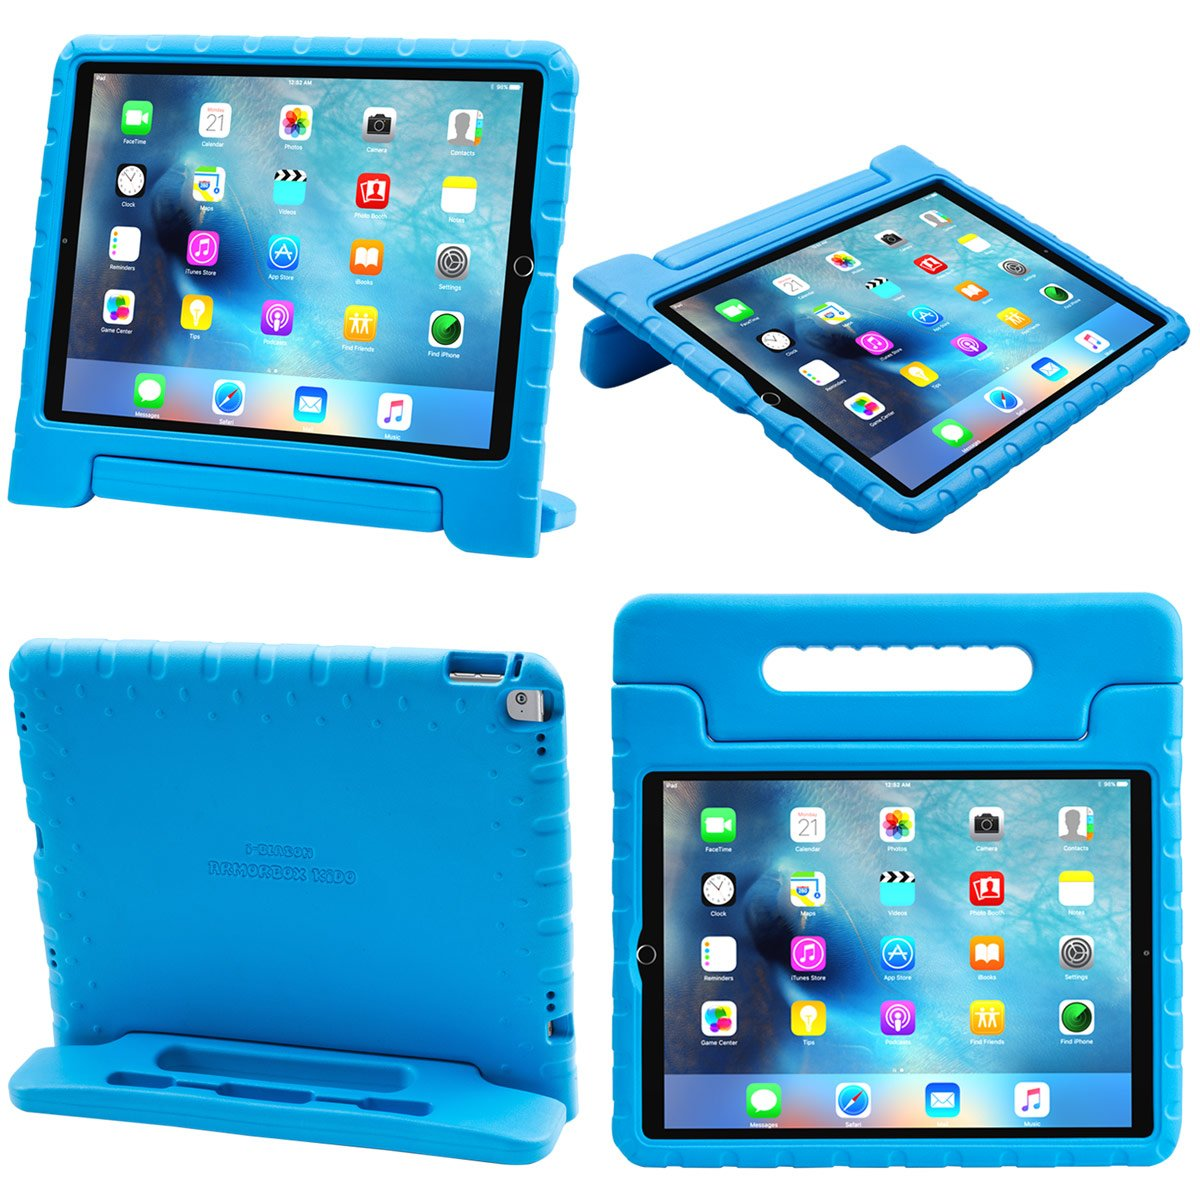 How to Identify a Case for an iPad Pro 12.9 - Keyguard Assistive Technology